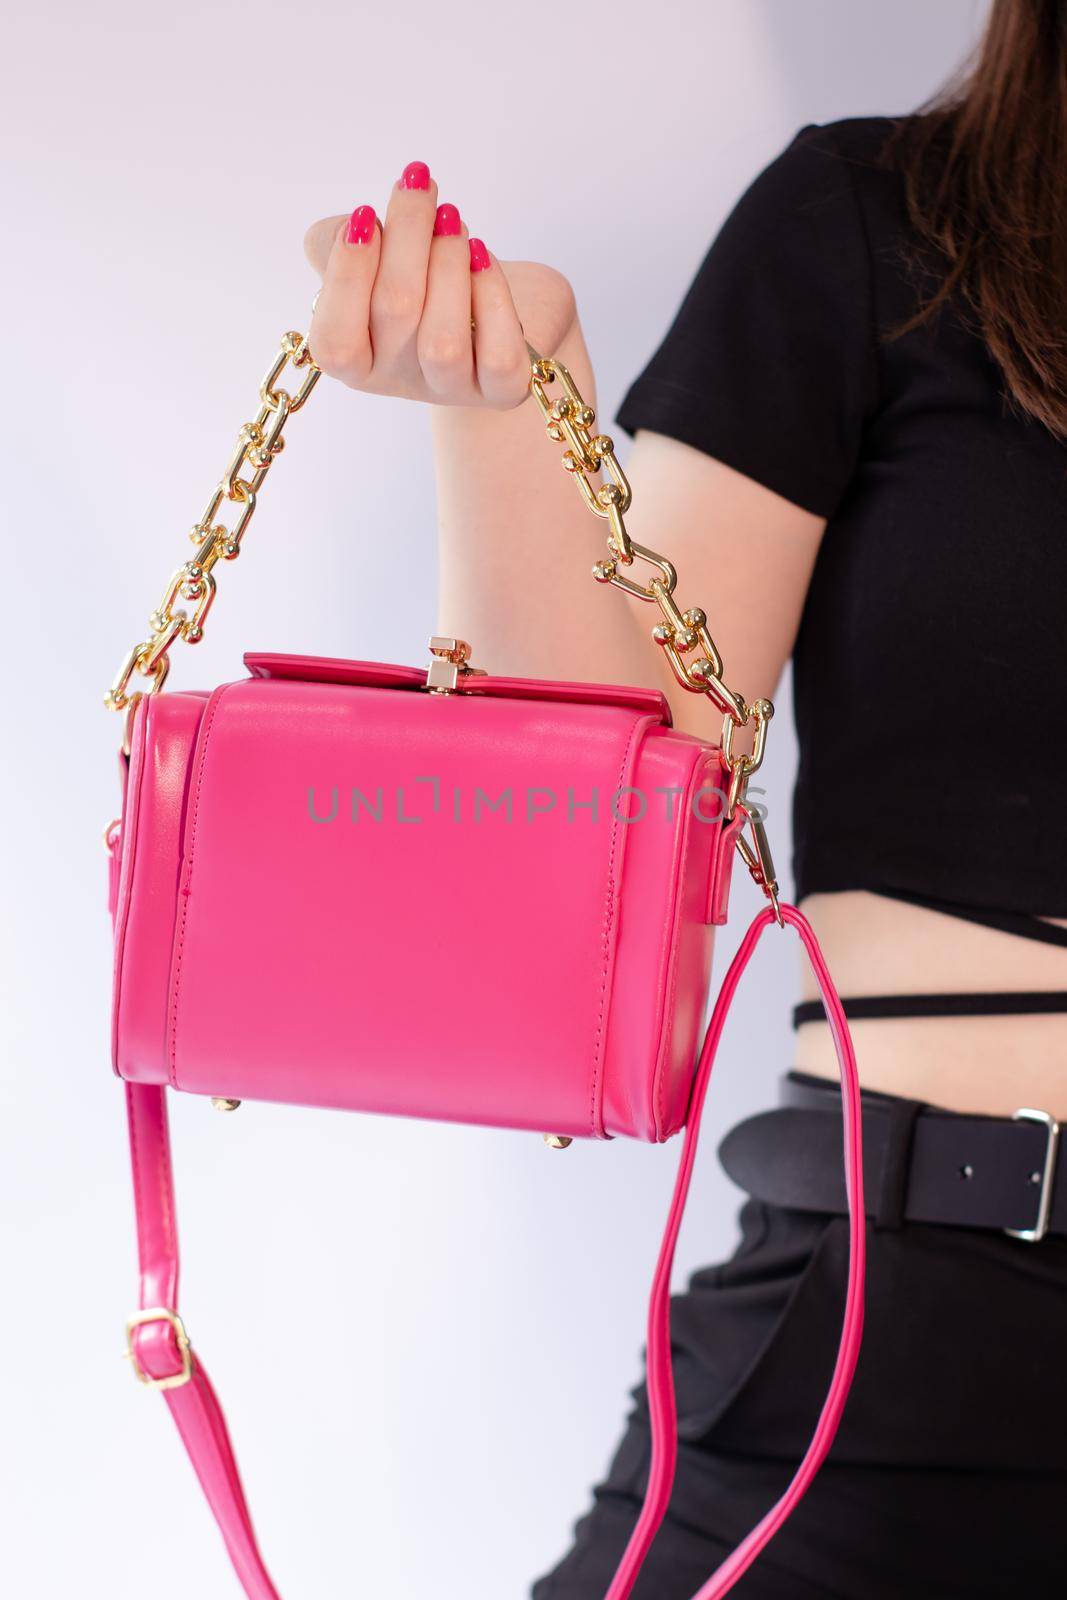 womans hand holding a pretty little pink handbag. Product photography. stylish handbag and purse for women. by oliavesna